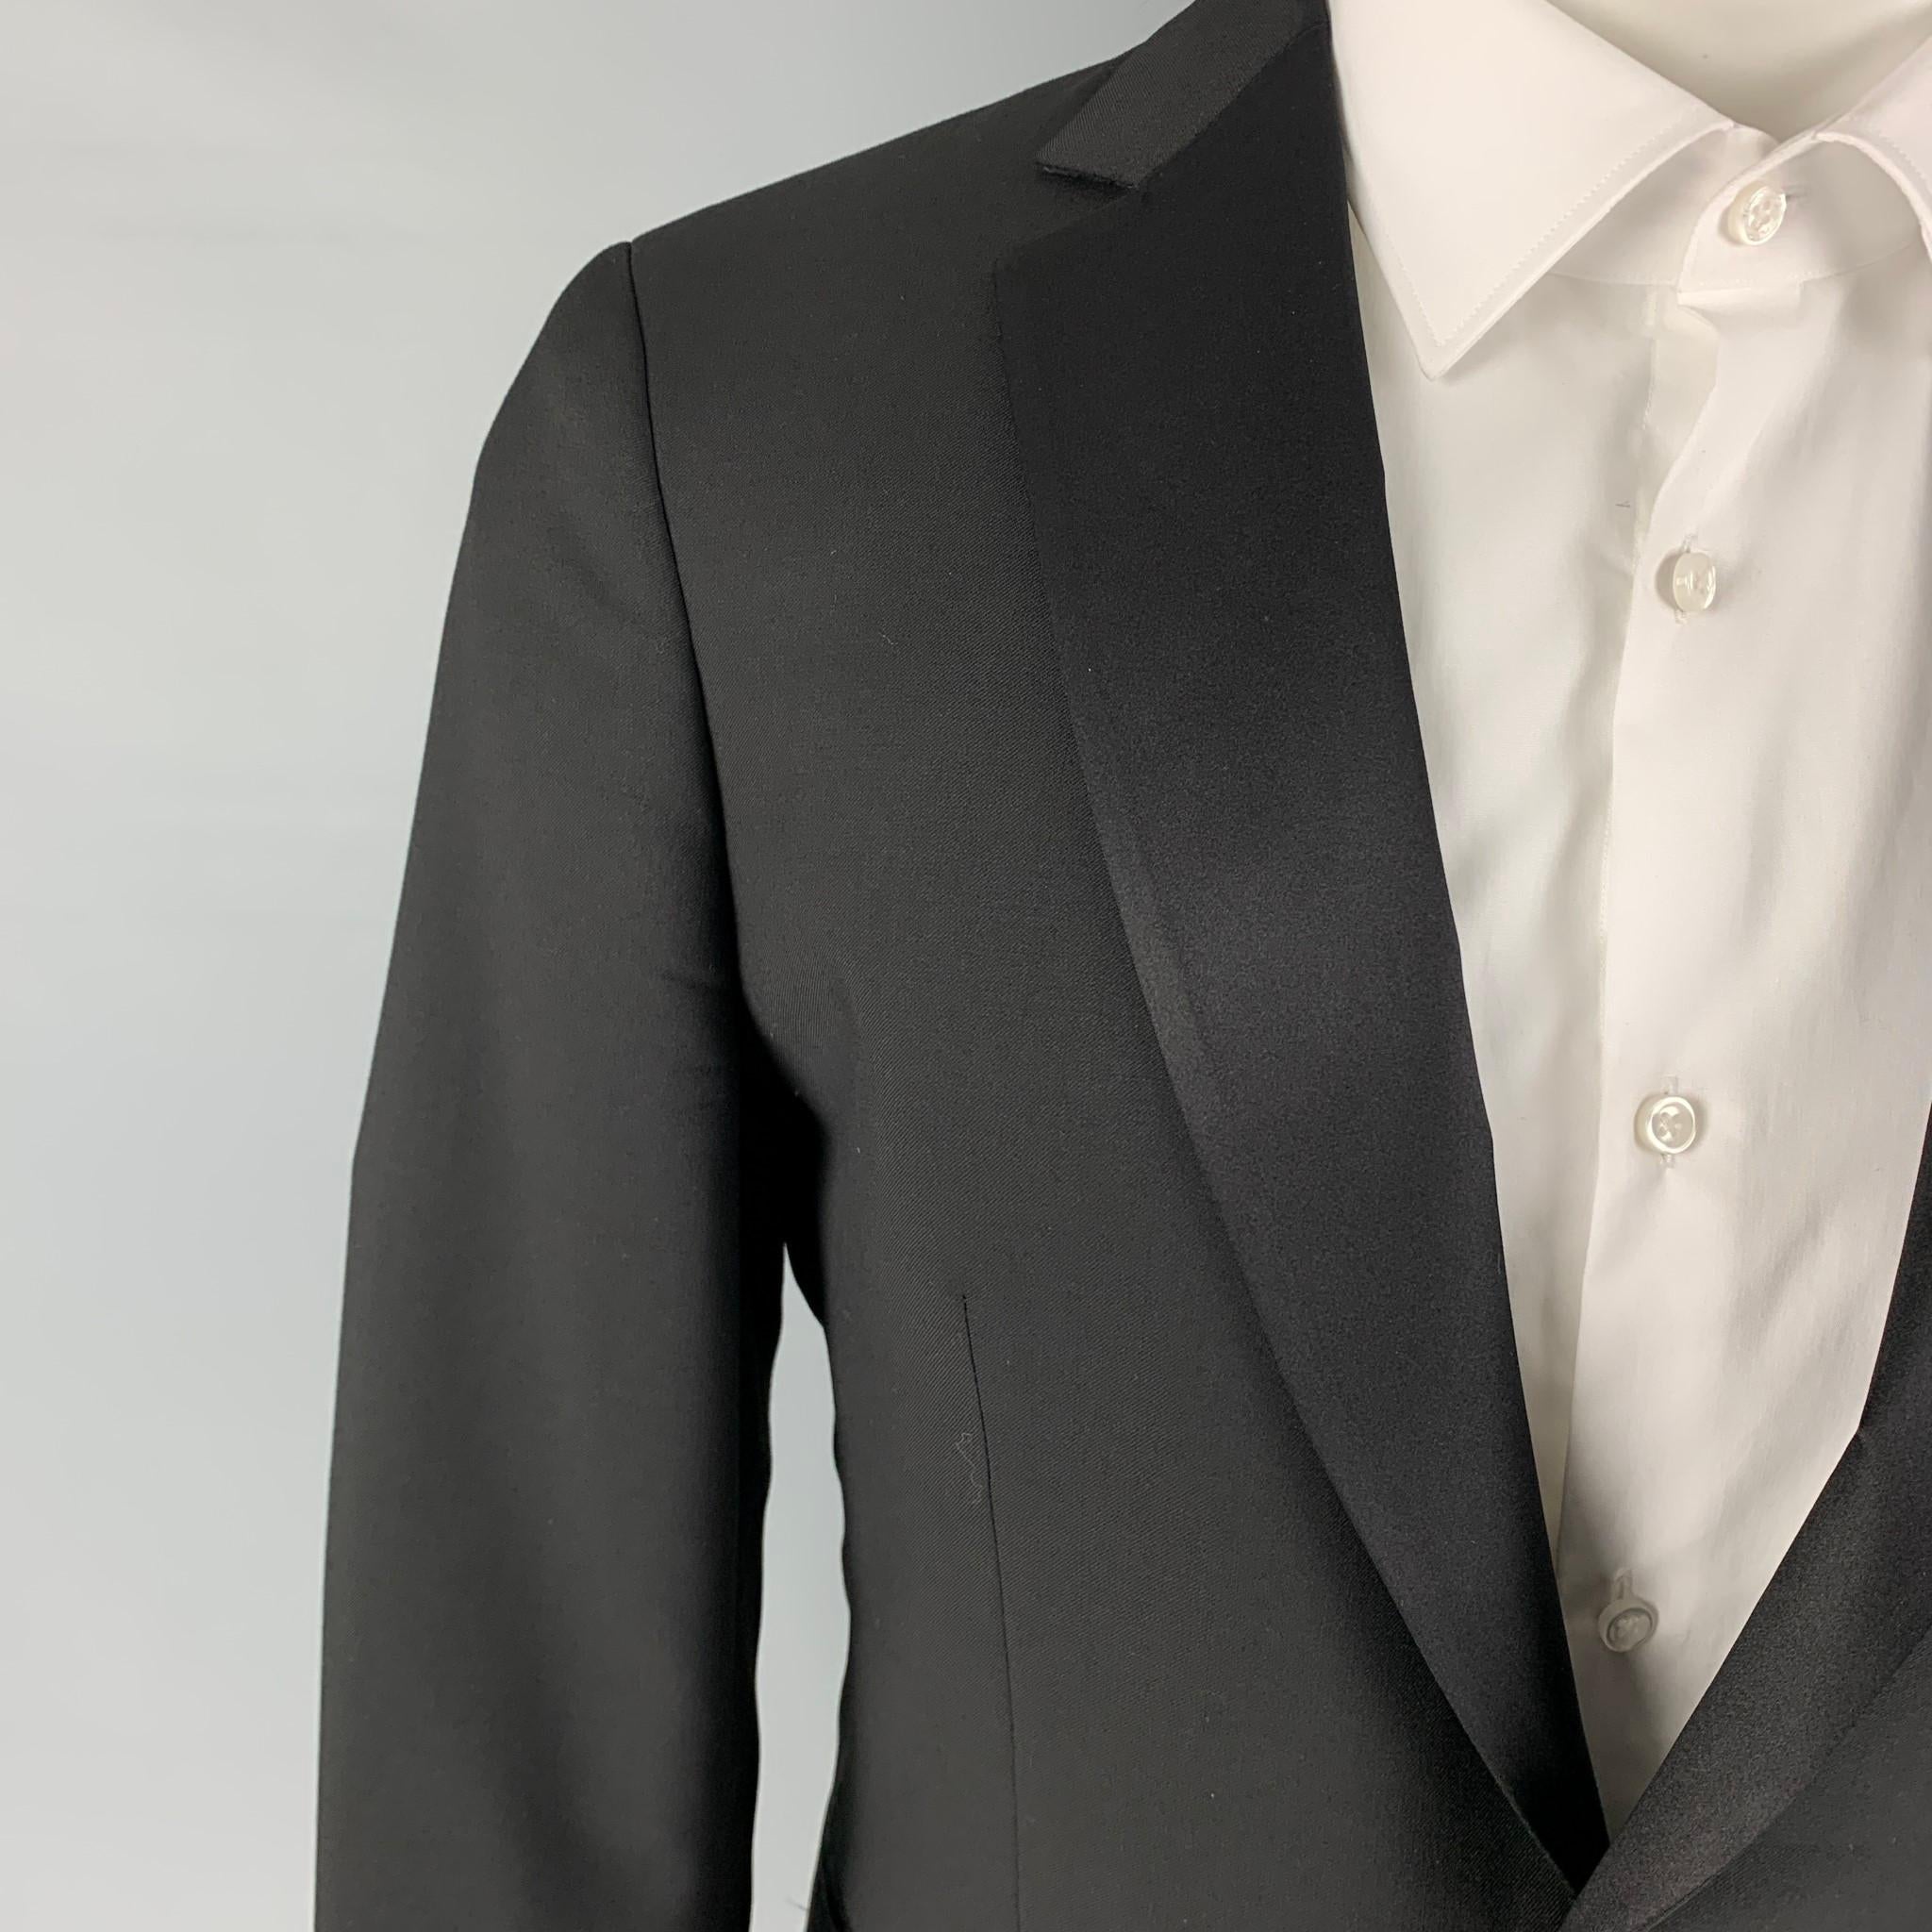 JOHN VARVATOS tuxedo sport coat comes in a black wool with a full liner featuring a notch lapel, slit pockets, single back vent, and a single button closure. 

Excellent Pre-Owned Condition.
Marked: 48

Measurements:

Shoulder: 17.5 in.
Chest: 38